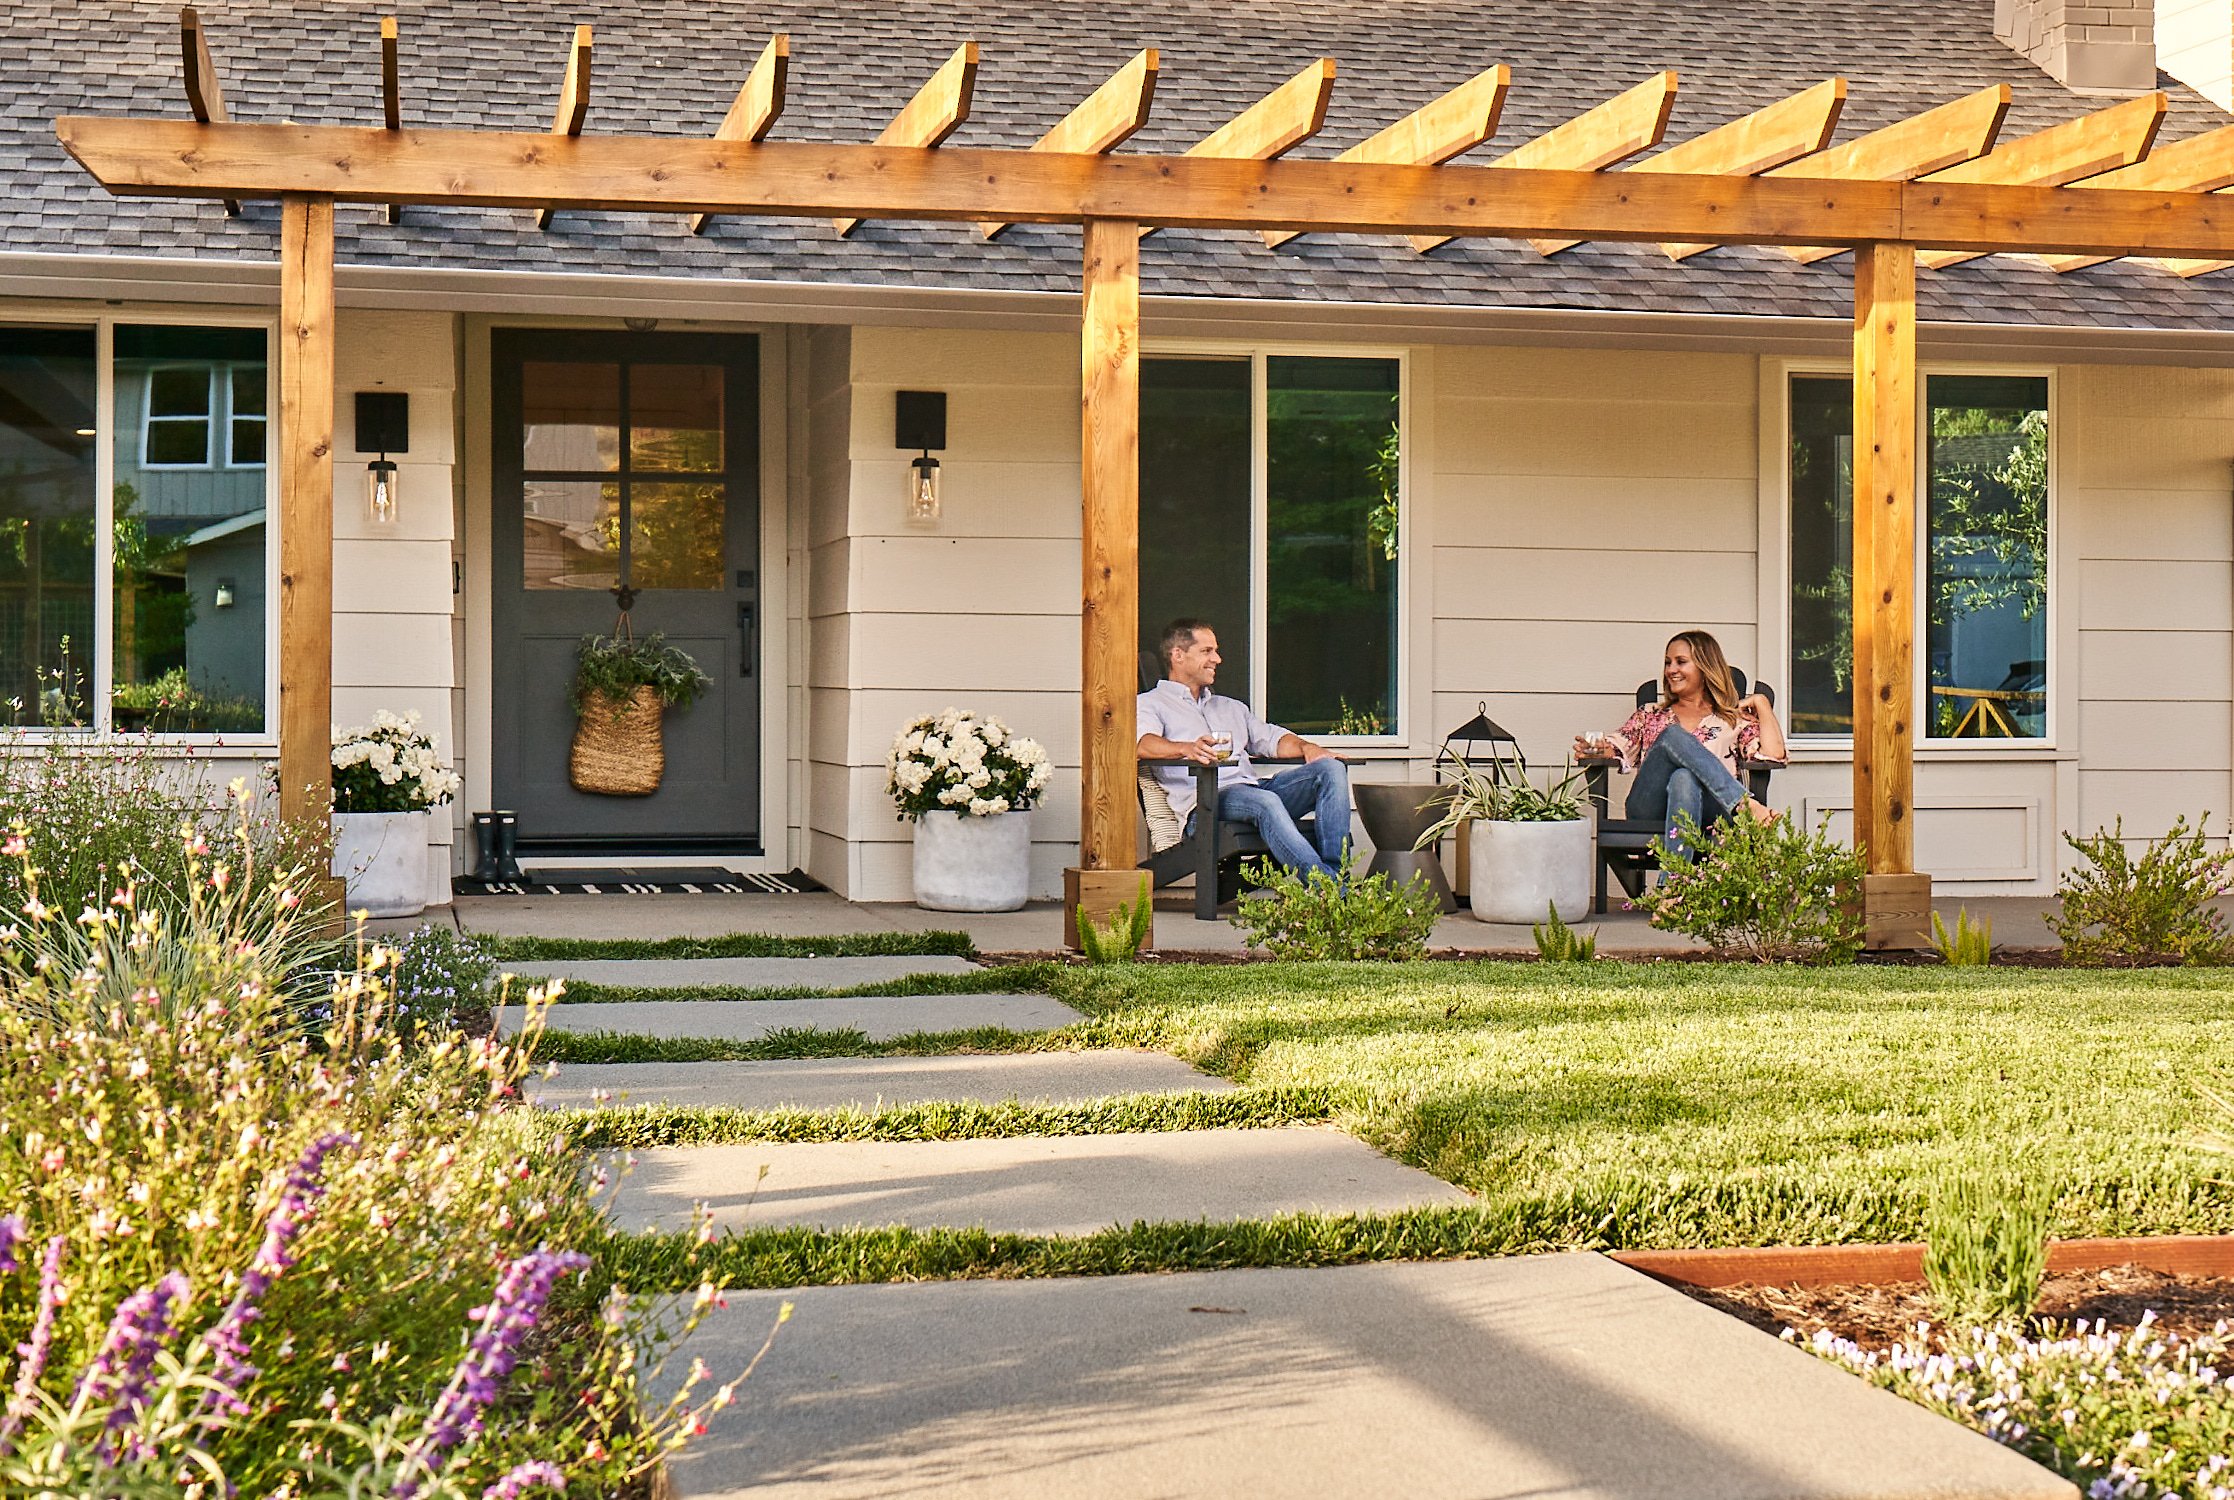 Man and woman sitting on front porch with wooden overhead pergola attached to home